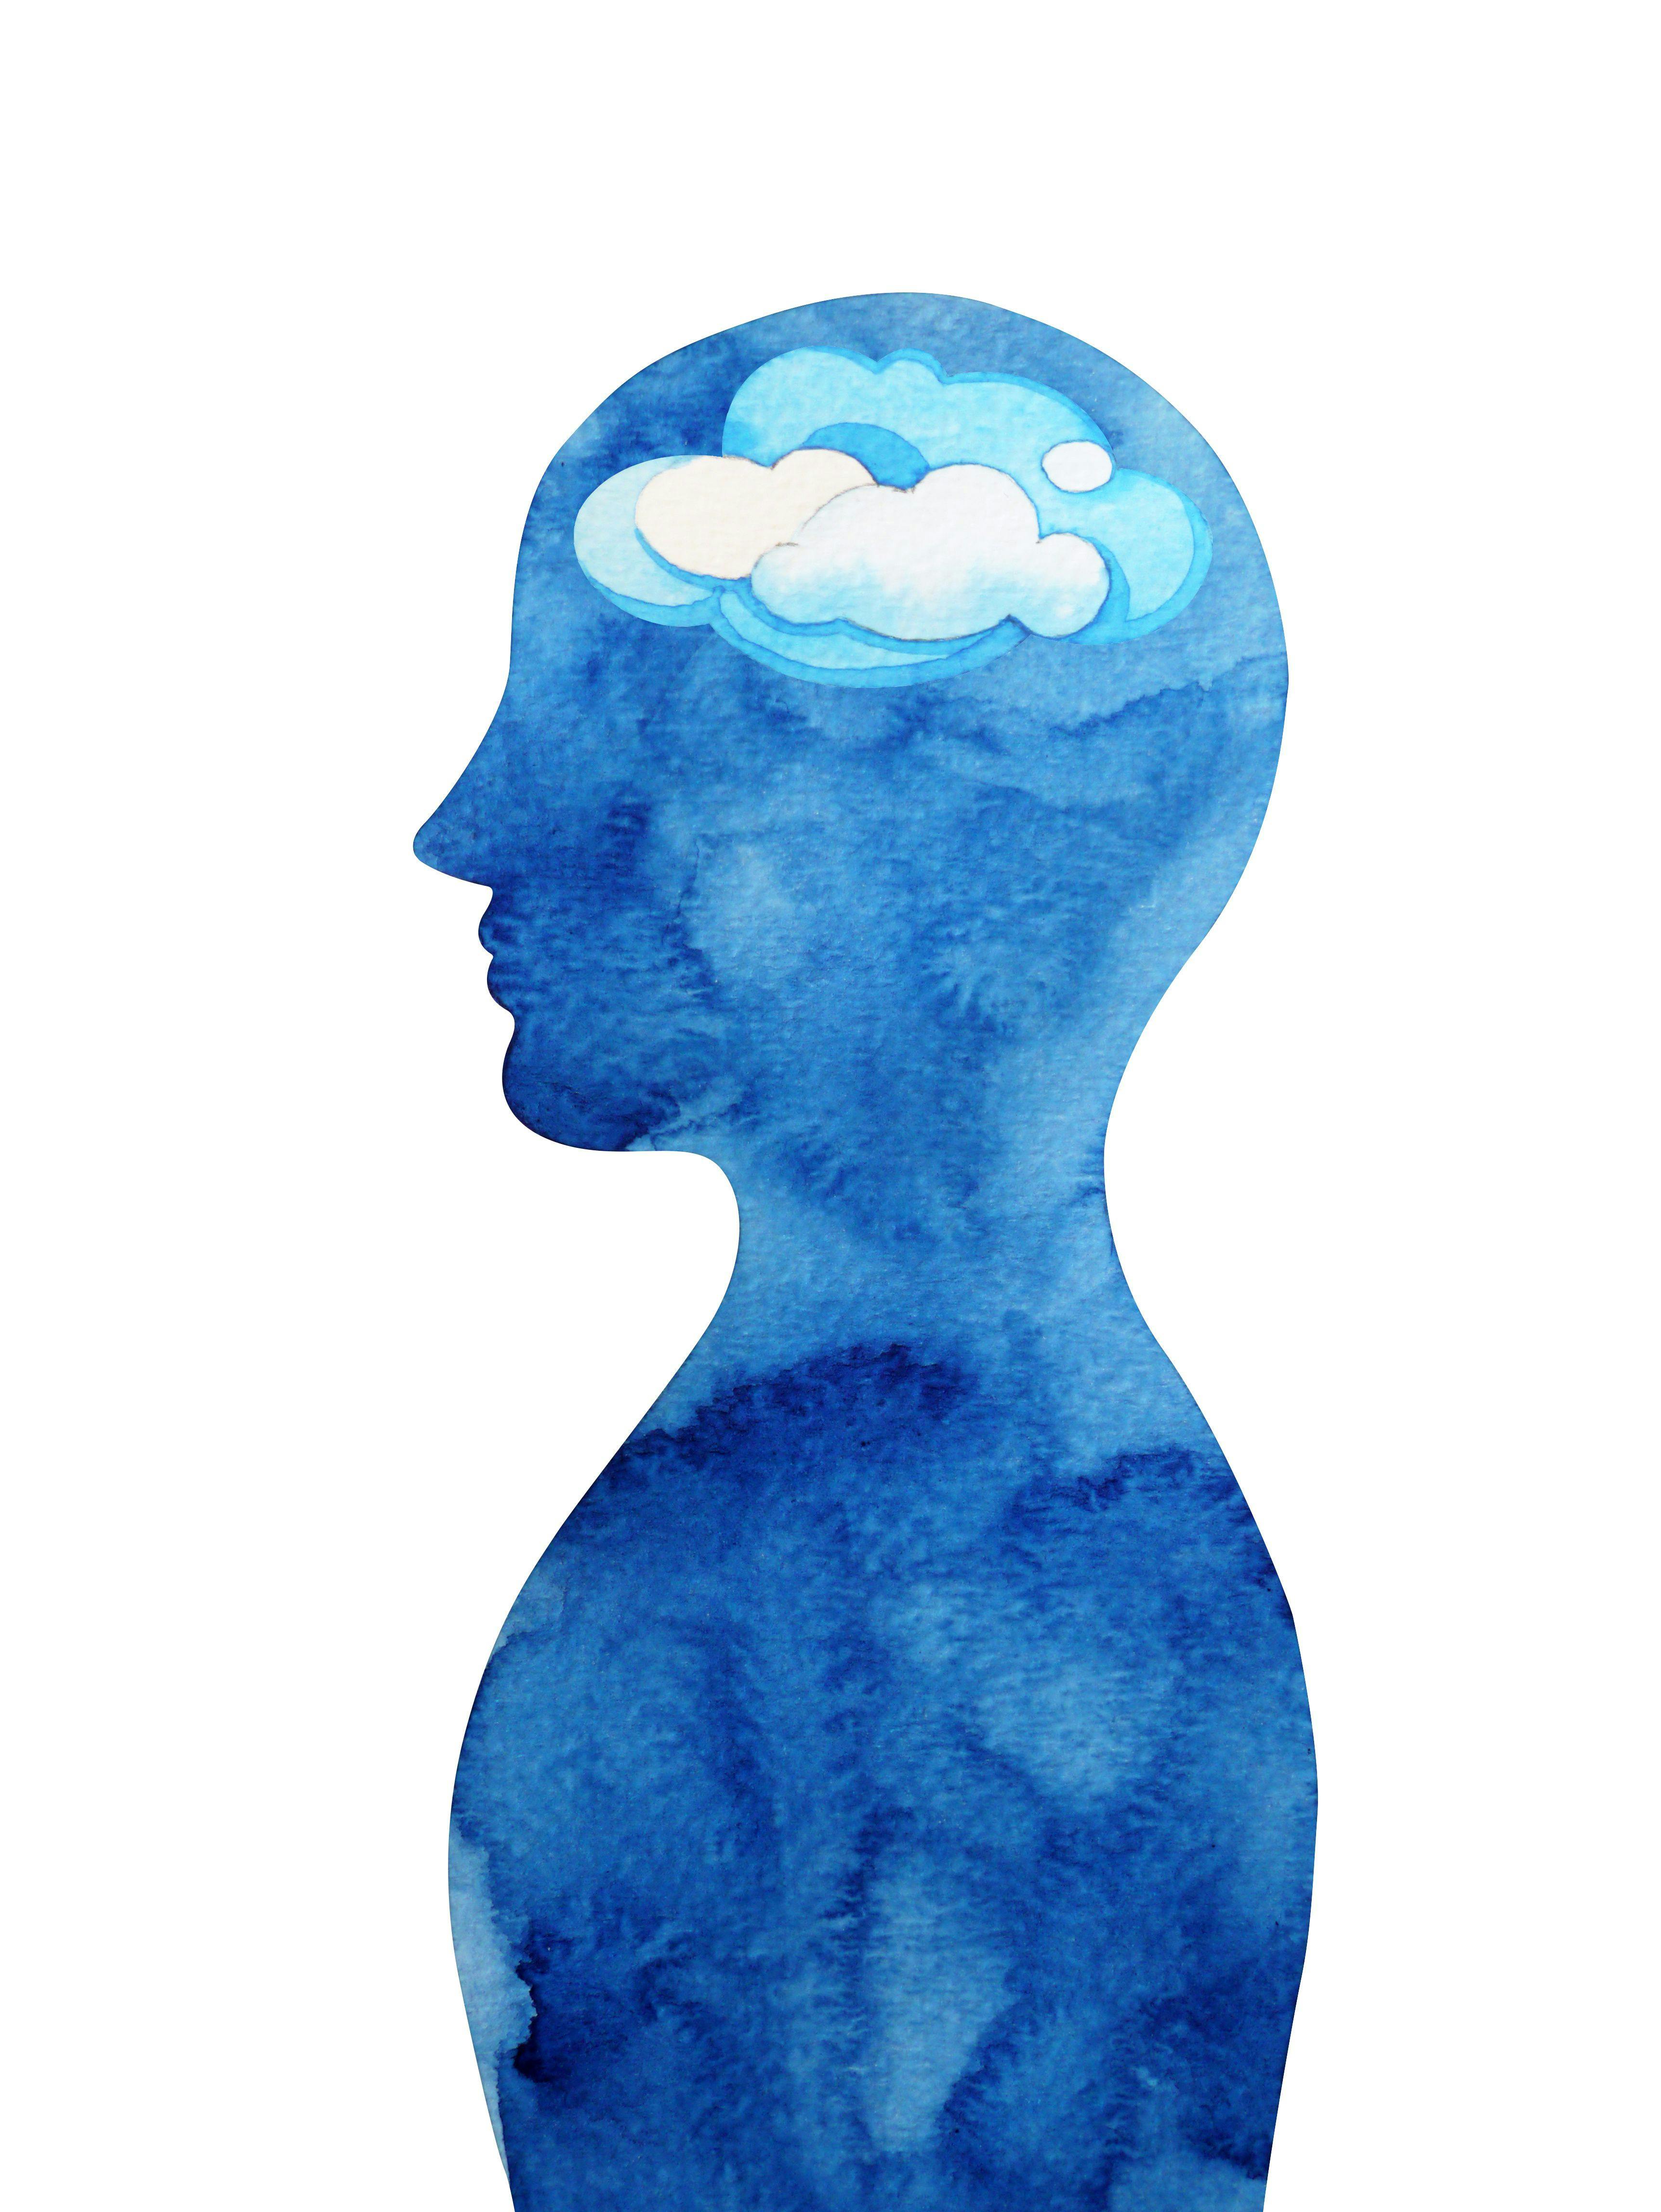 Mindfulness Is Beneficial to Patients and Providers 